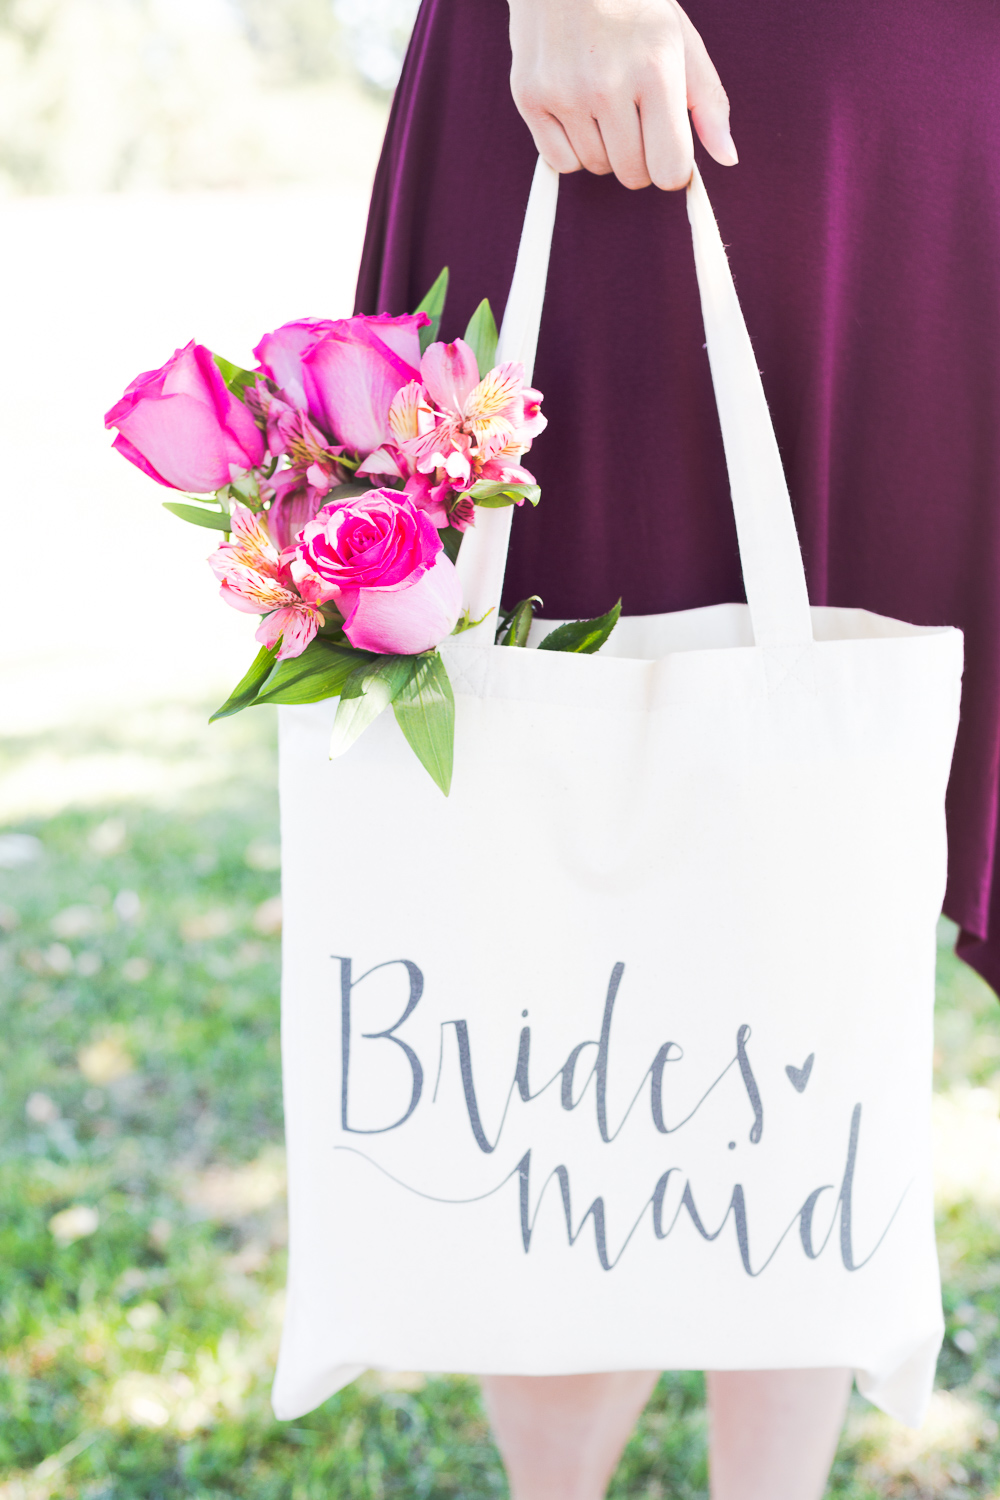 Bridesmaid Gift Ideas: these simple and inexpensive bridesmaid gift ideas are the perfect “thank-you’s” for the special ladies on your wedding day!